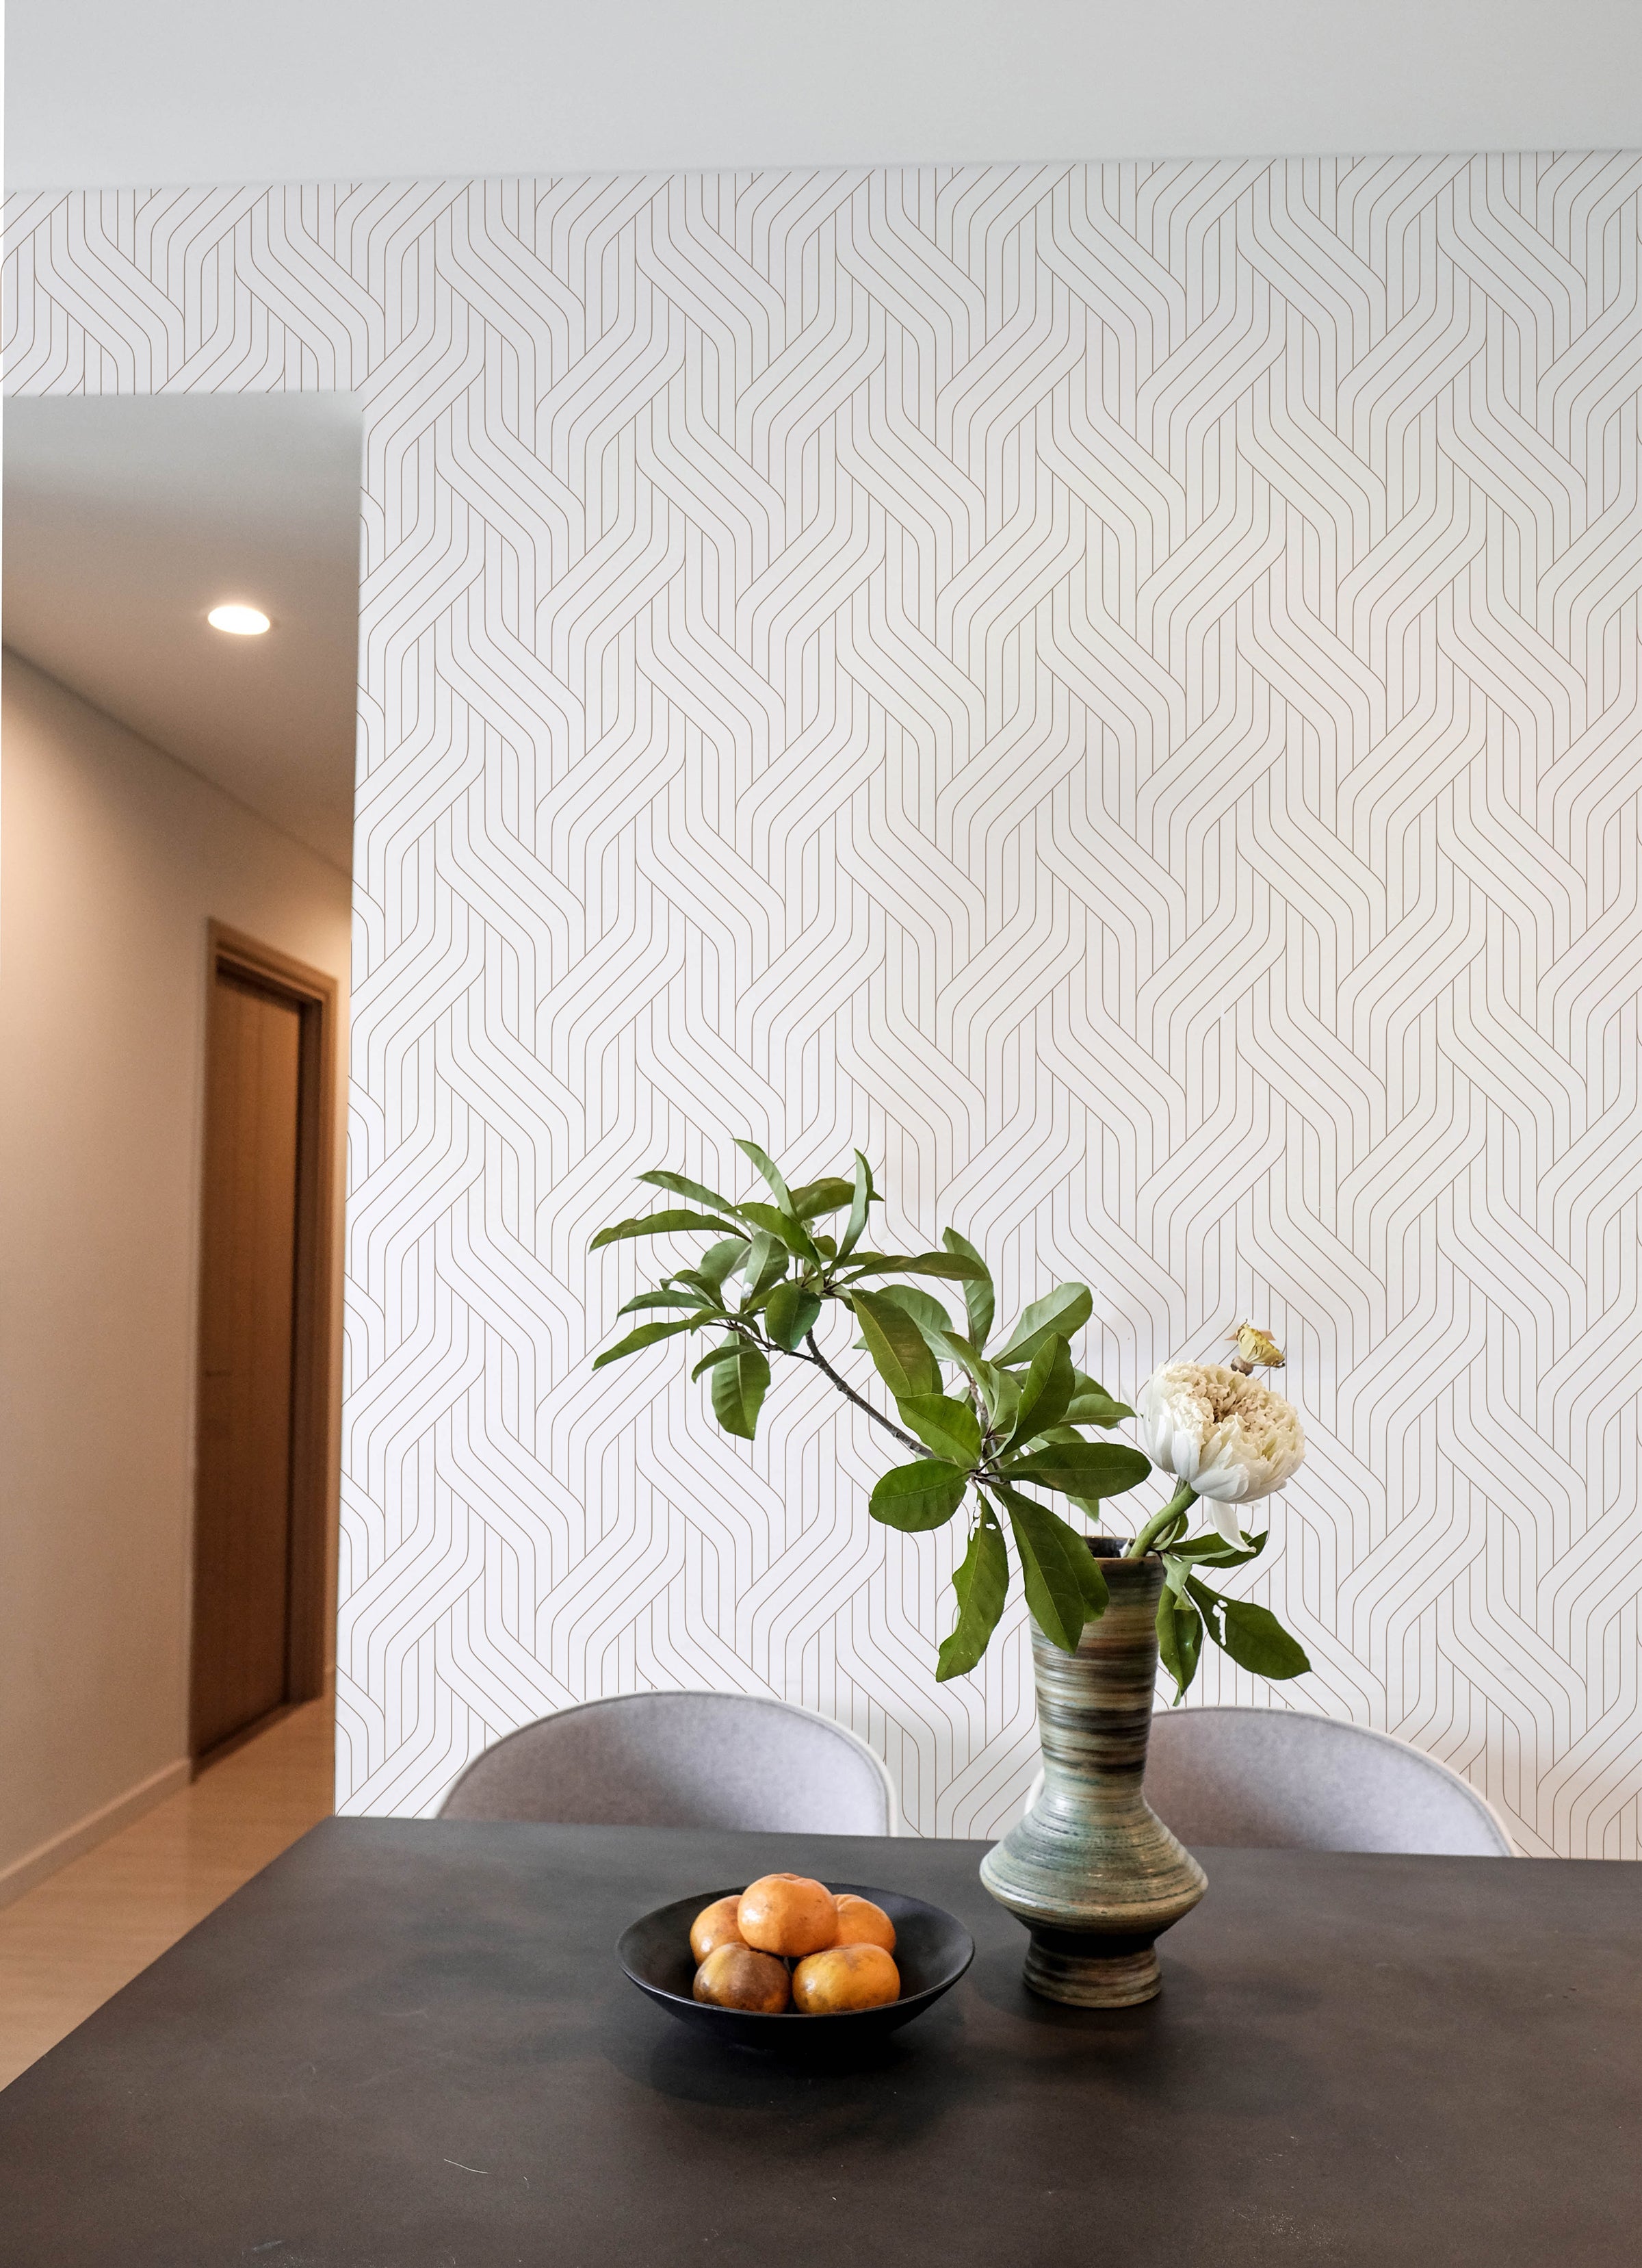 Modern Braids Wallpaper in a dining room setting with a vase of greenery and fruit bowl on the table